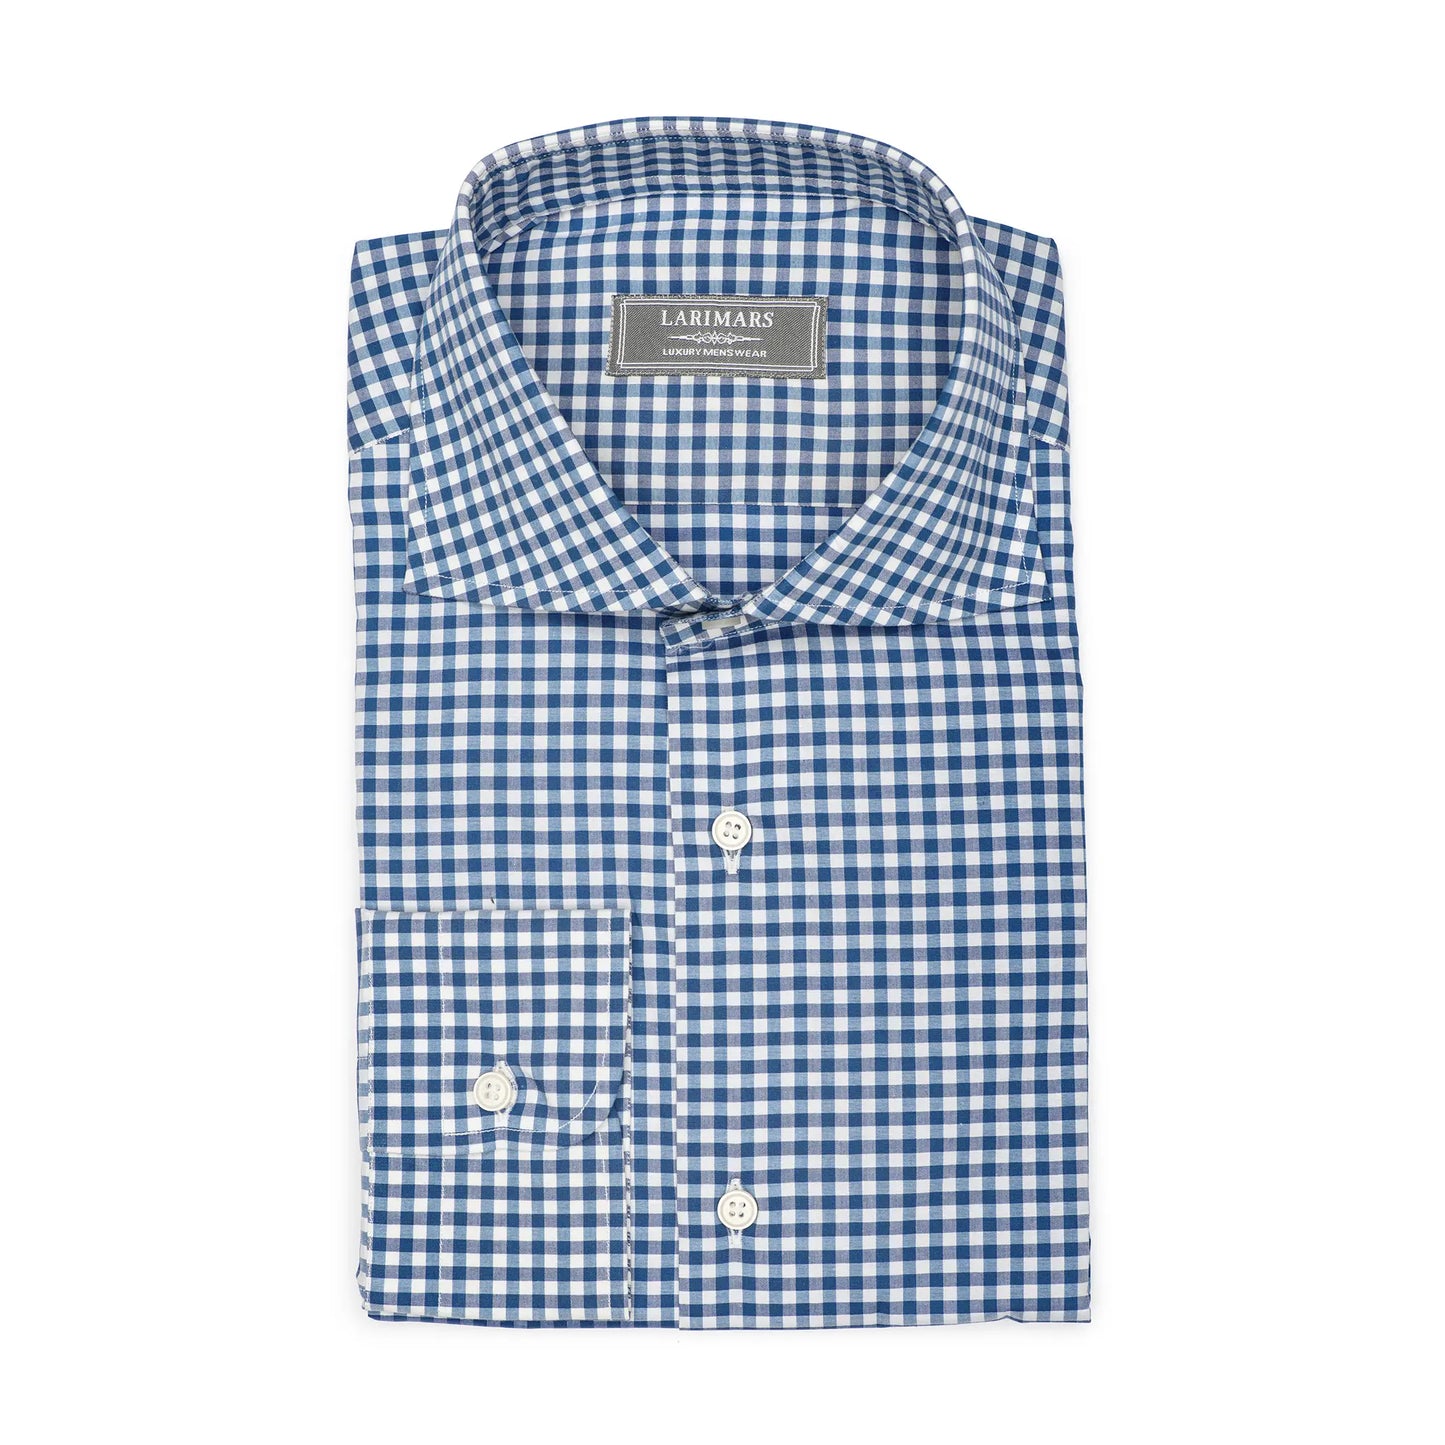 Blue Small Gingham Check - Larimars Clothing Men's Formal and casual wear shirts